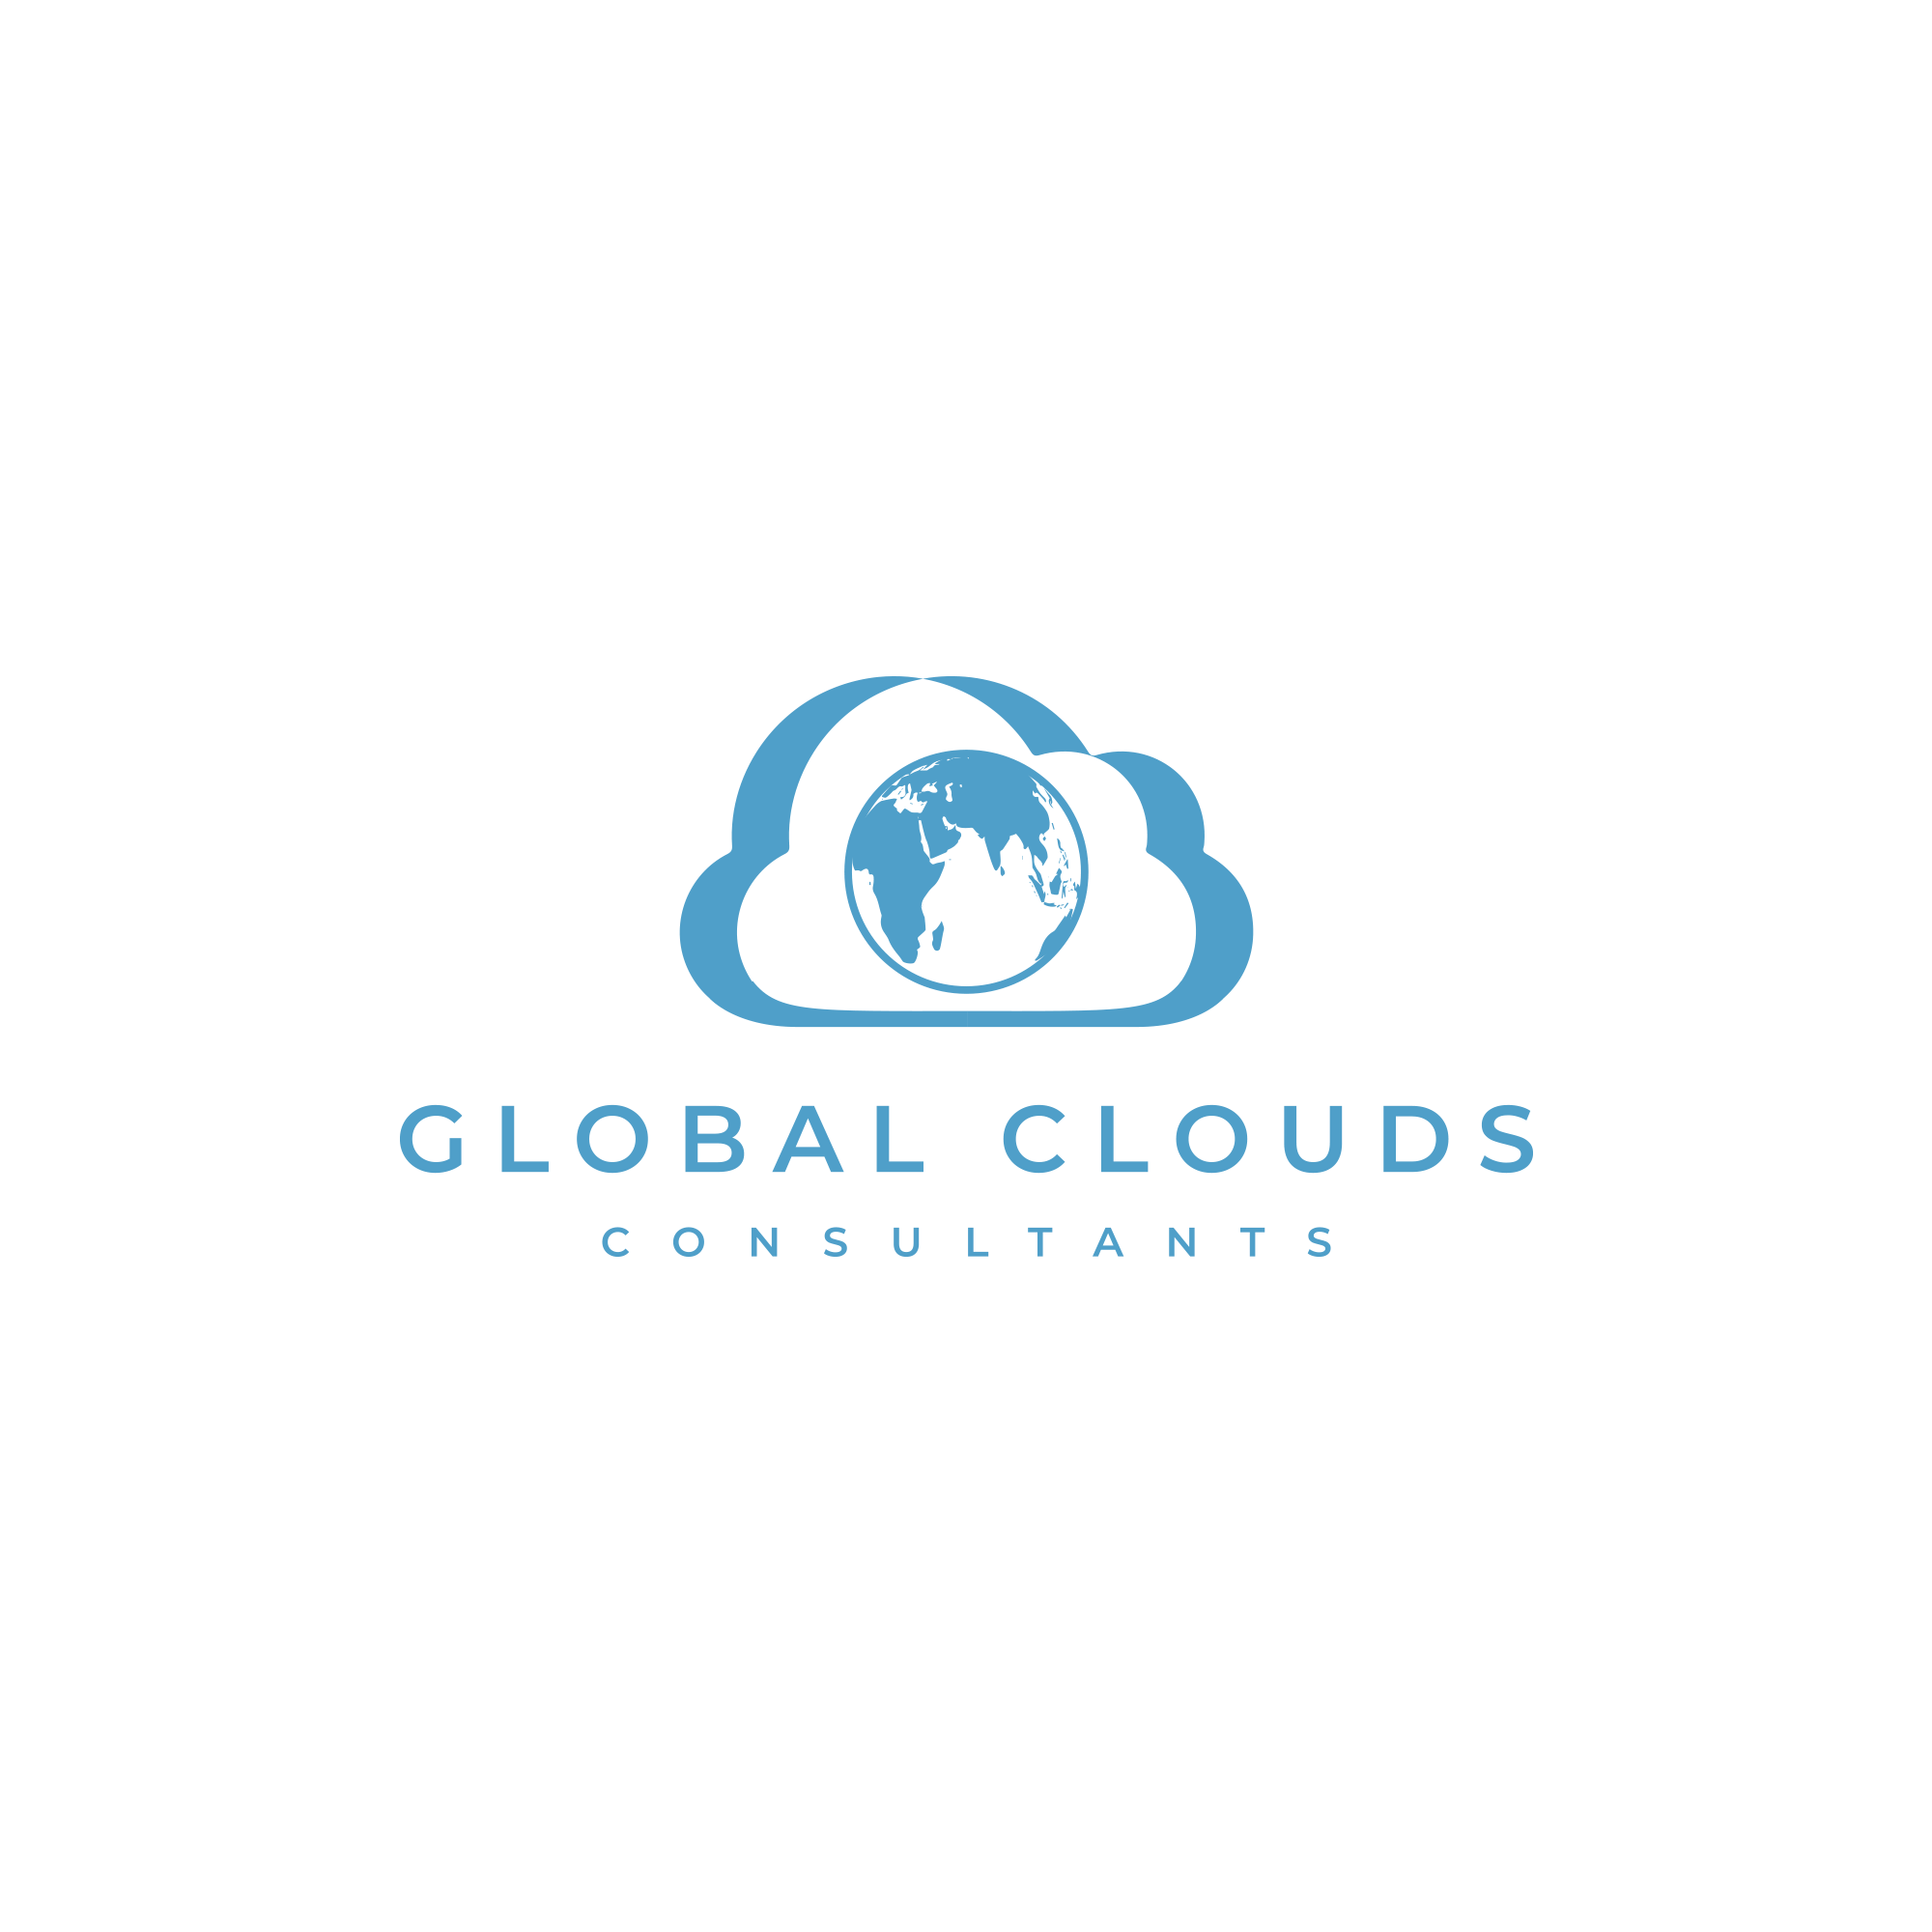 GlobalClouds Consultants Incorporated